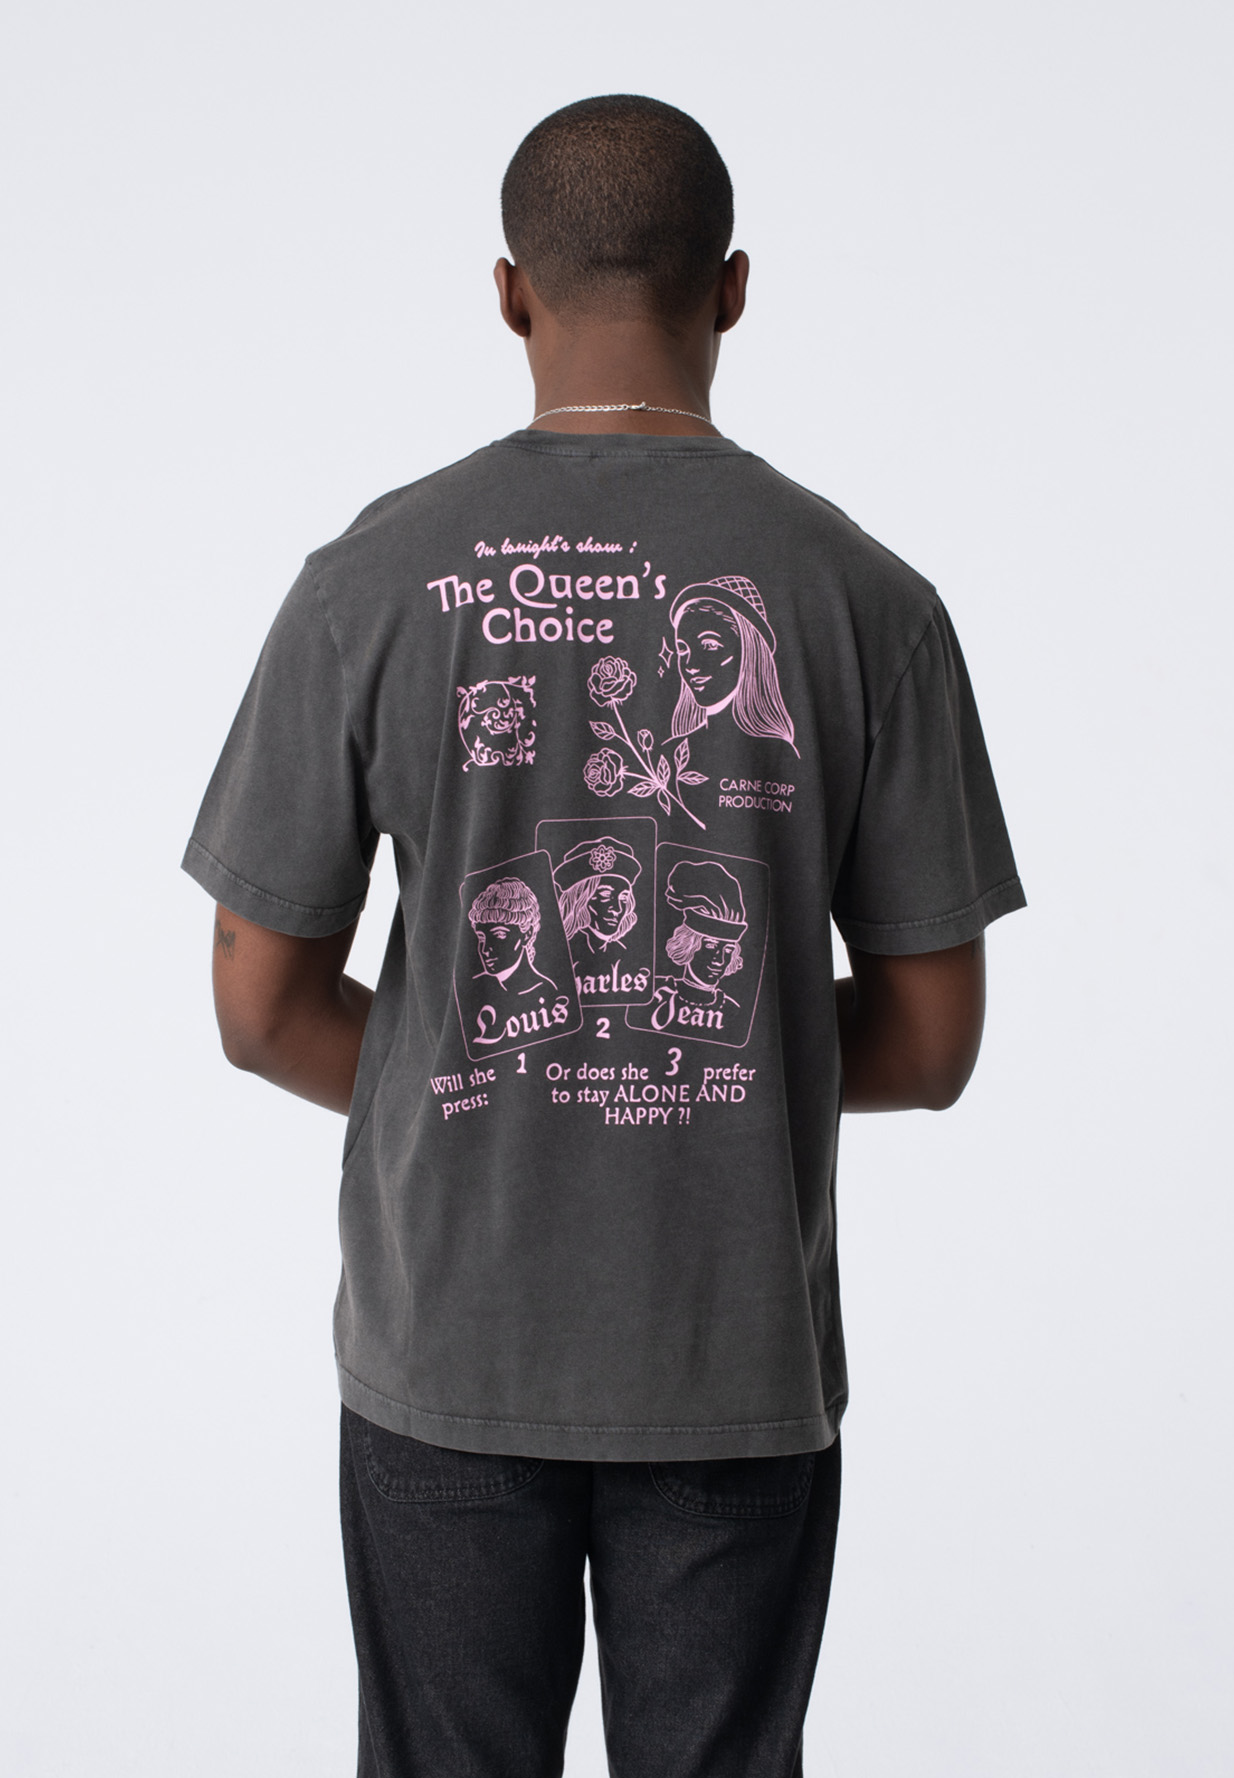 CARNE BOLLENTE T-Shirt The Queen's Choice washed black M